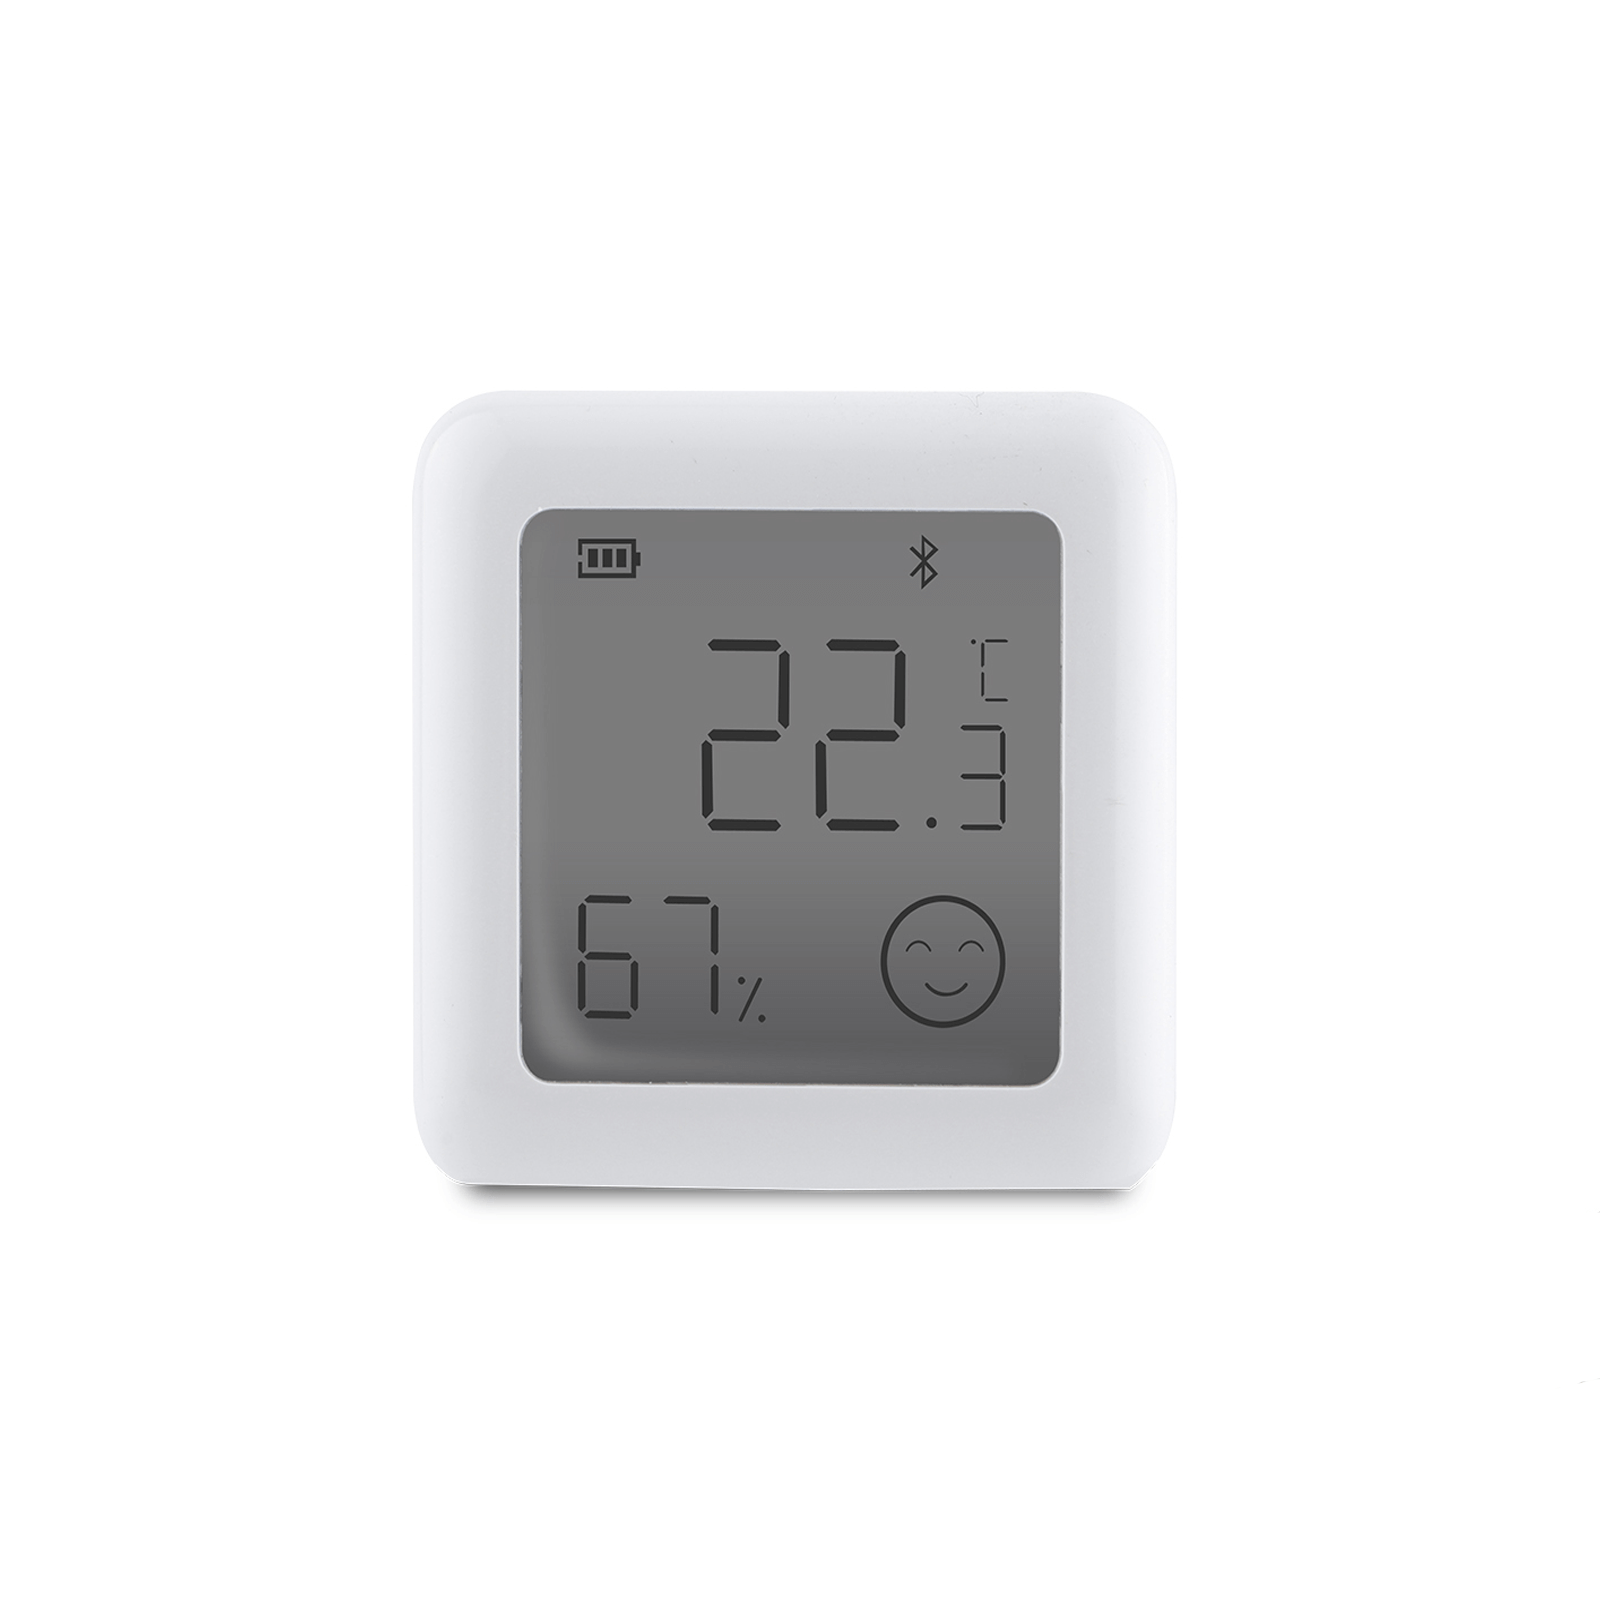 Bluetooth Digital Electronic Temperature and Humidity Meter Gauge  (Thermometer and Hygrometer in one with LCD Display) - Room Humidity and Temperature  Sensor Gauge with Remote App Monitoring, Notification Alerts, 2 Years Data